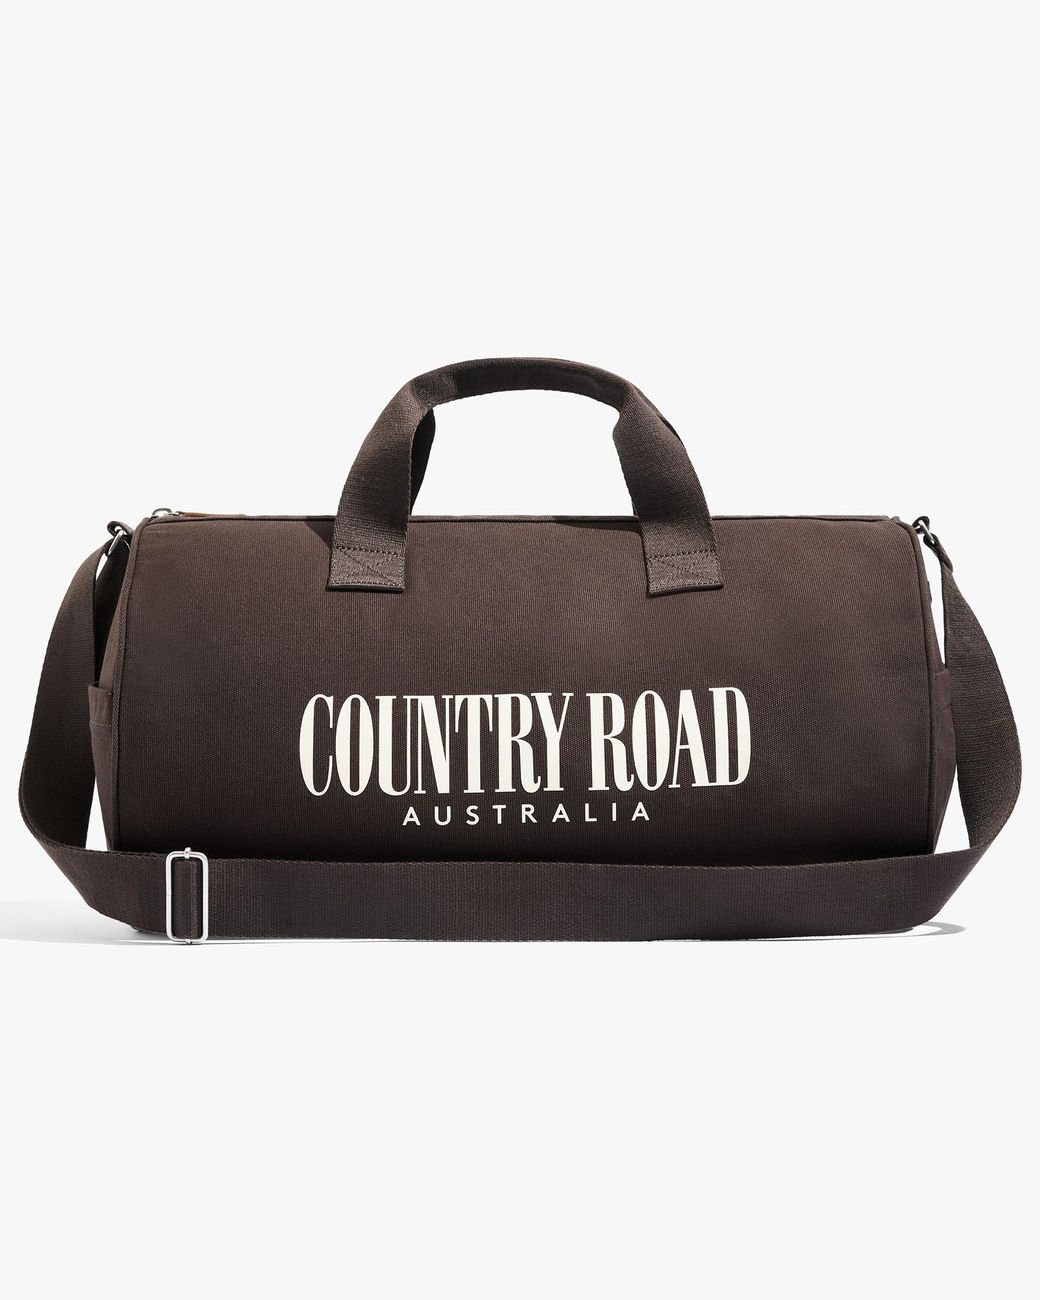 Country Road nylon #duffle #review. The #Countryroadduffle #bag is a... |  TikTok